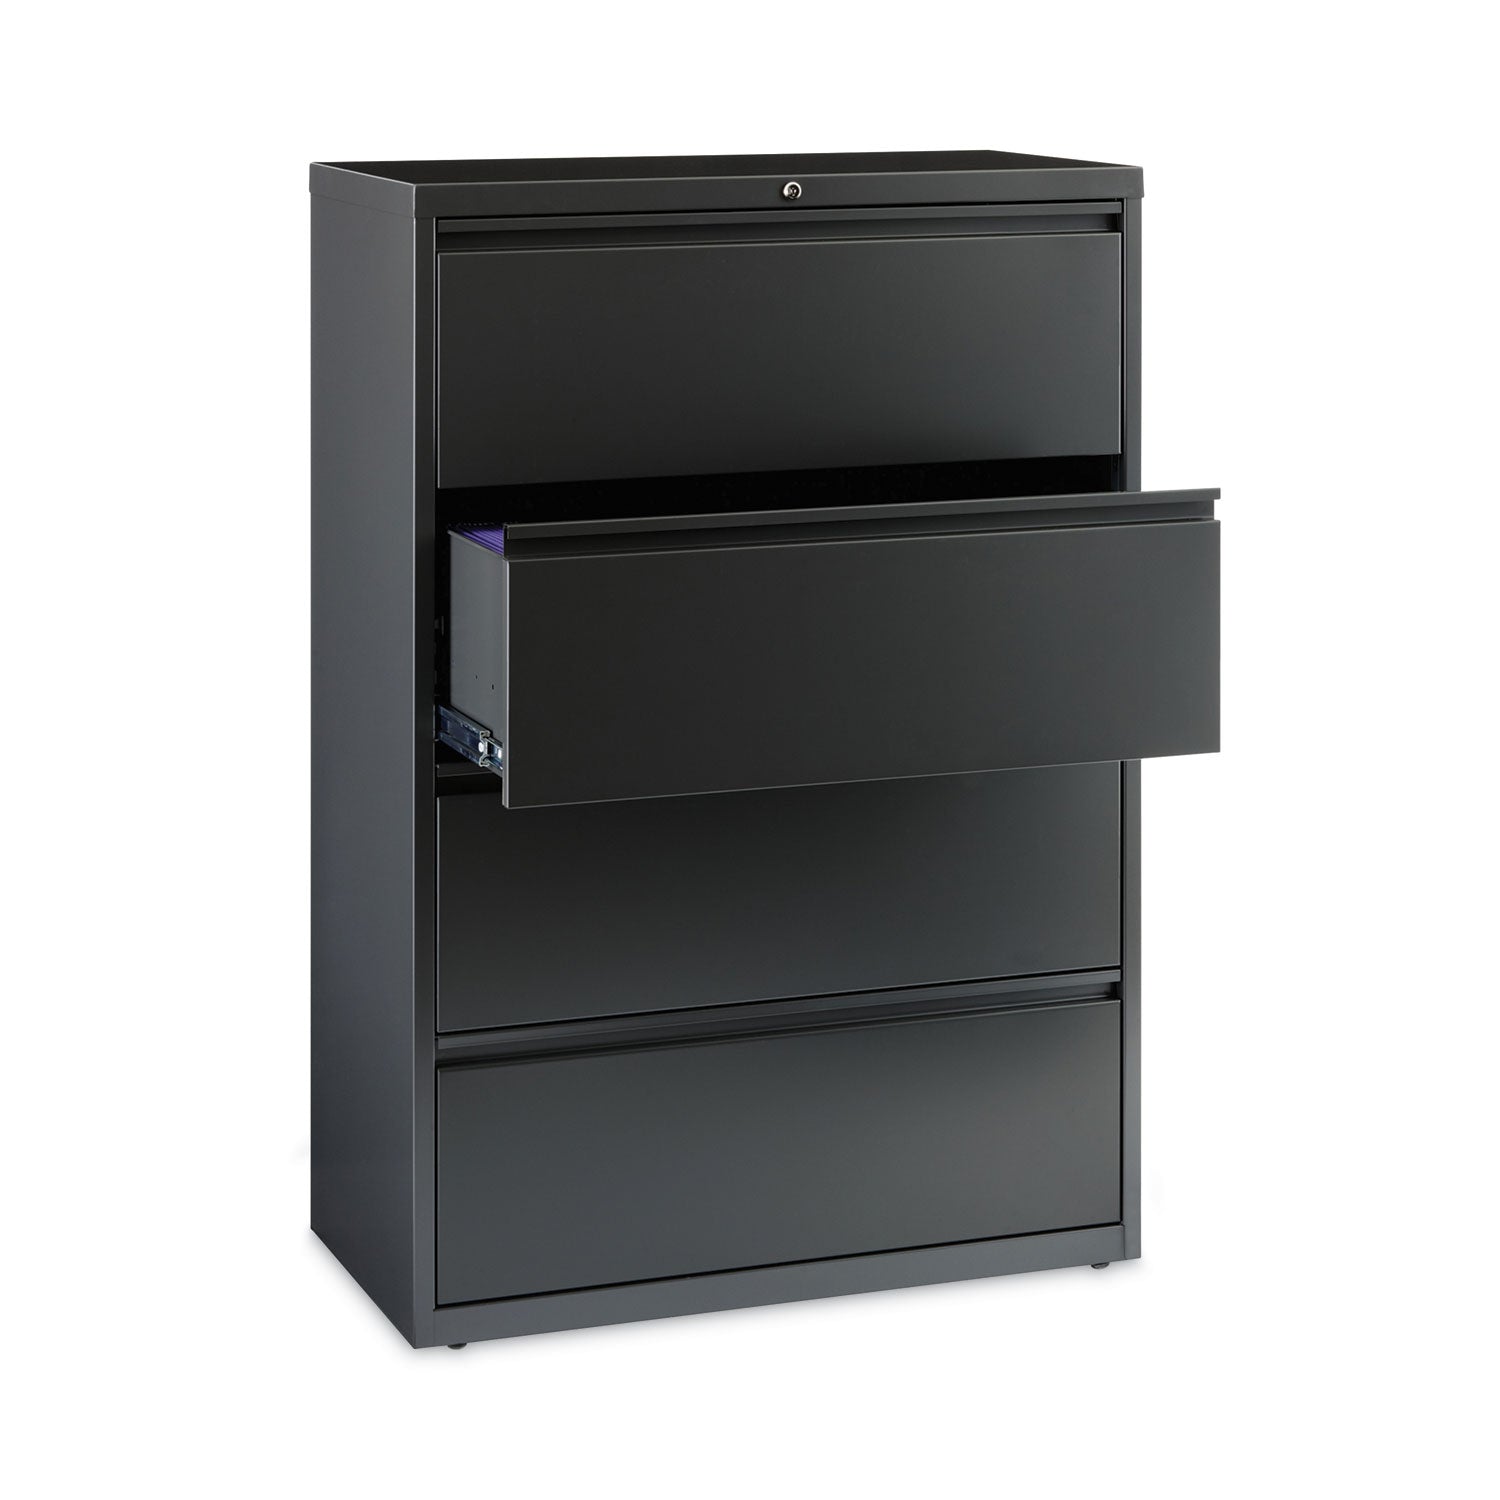 lateral-file-cabinet-4-letter-legal-a4-size-file-drawers-charcoal-36-x-1862-x-525_hid16067 - 3